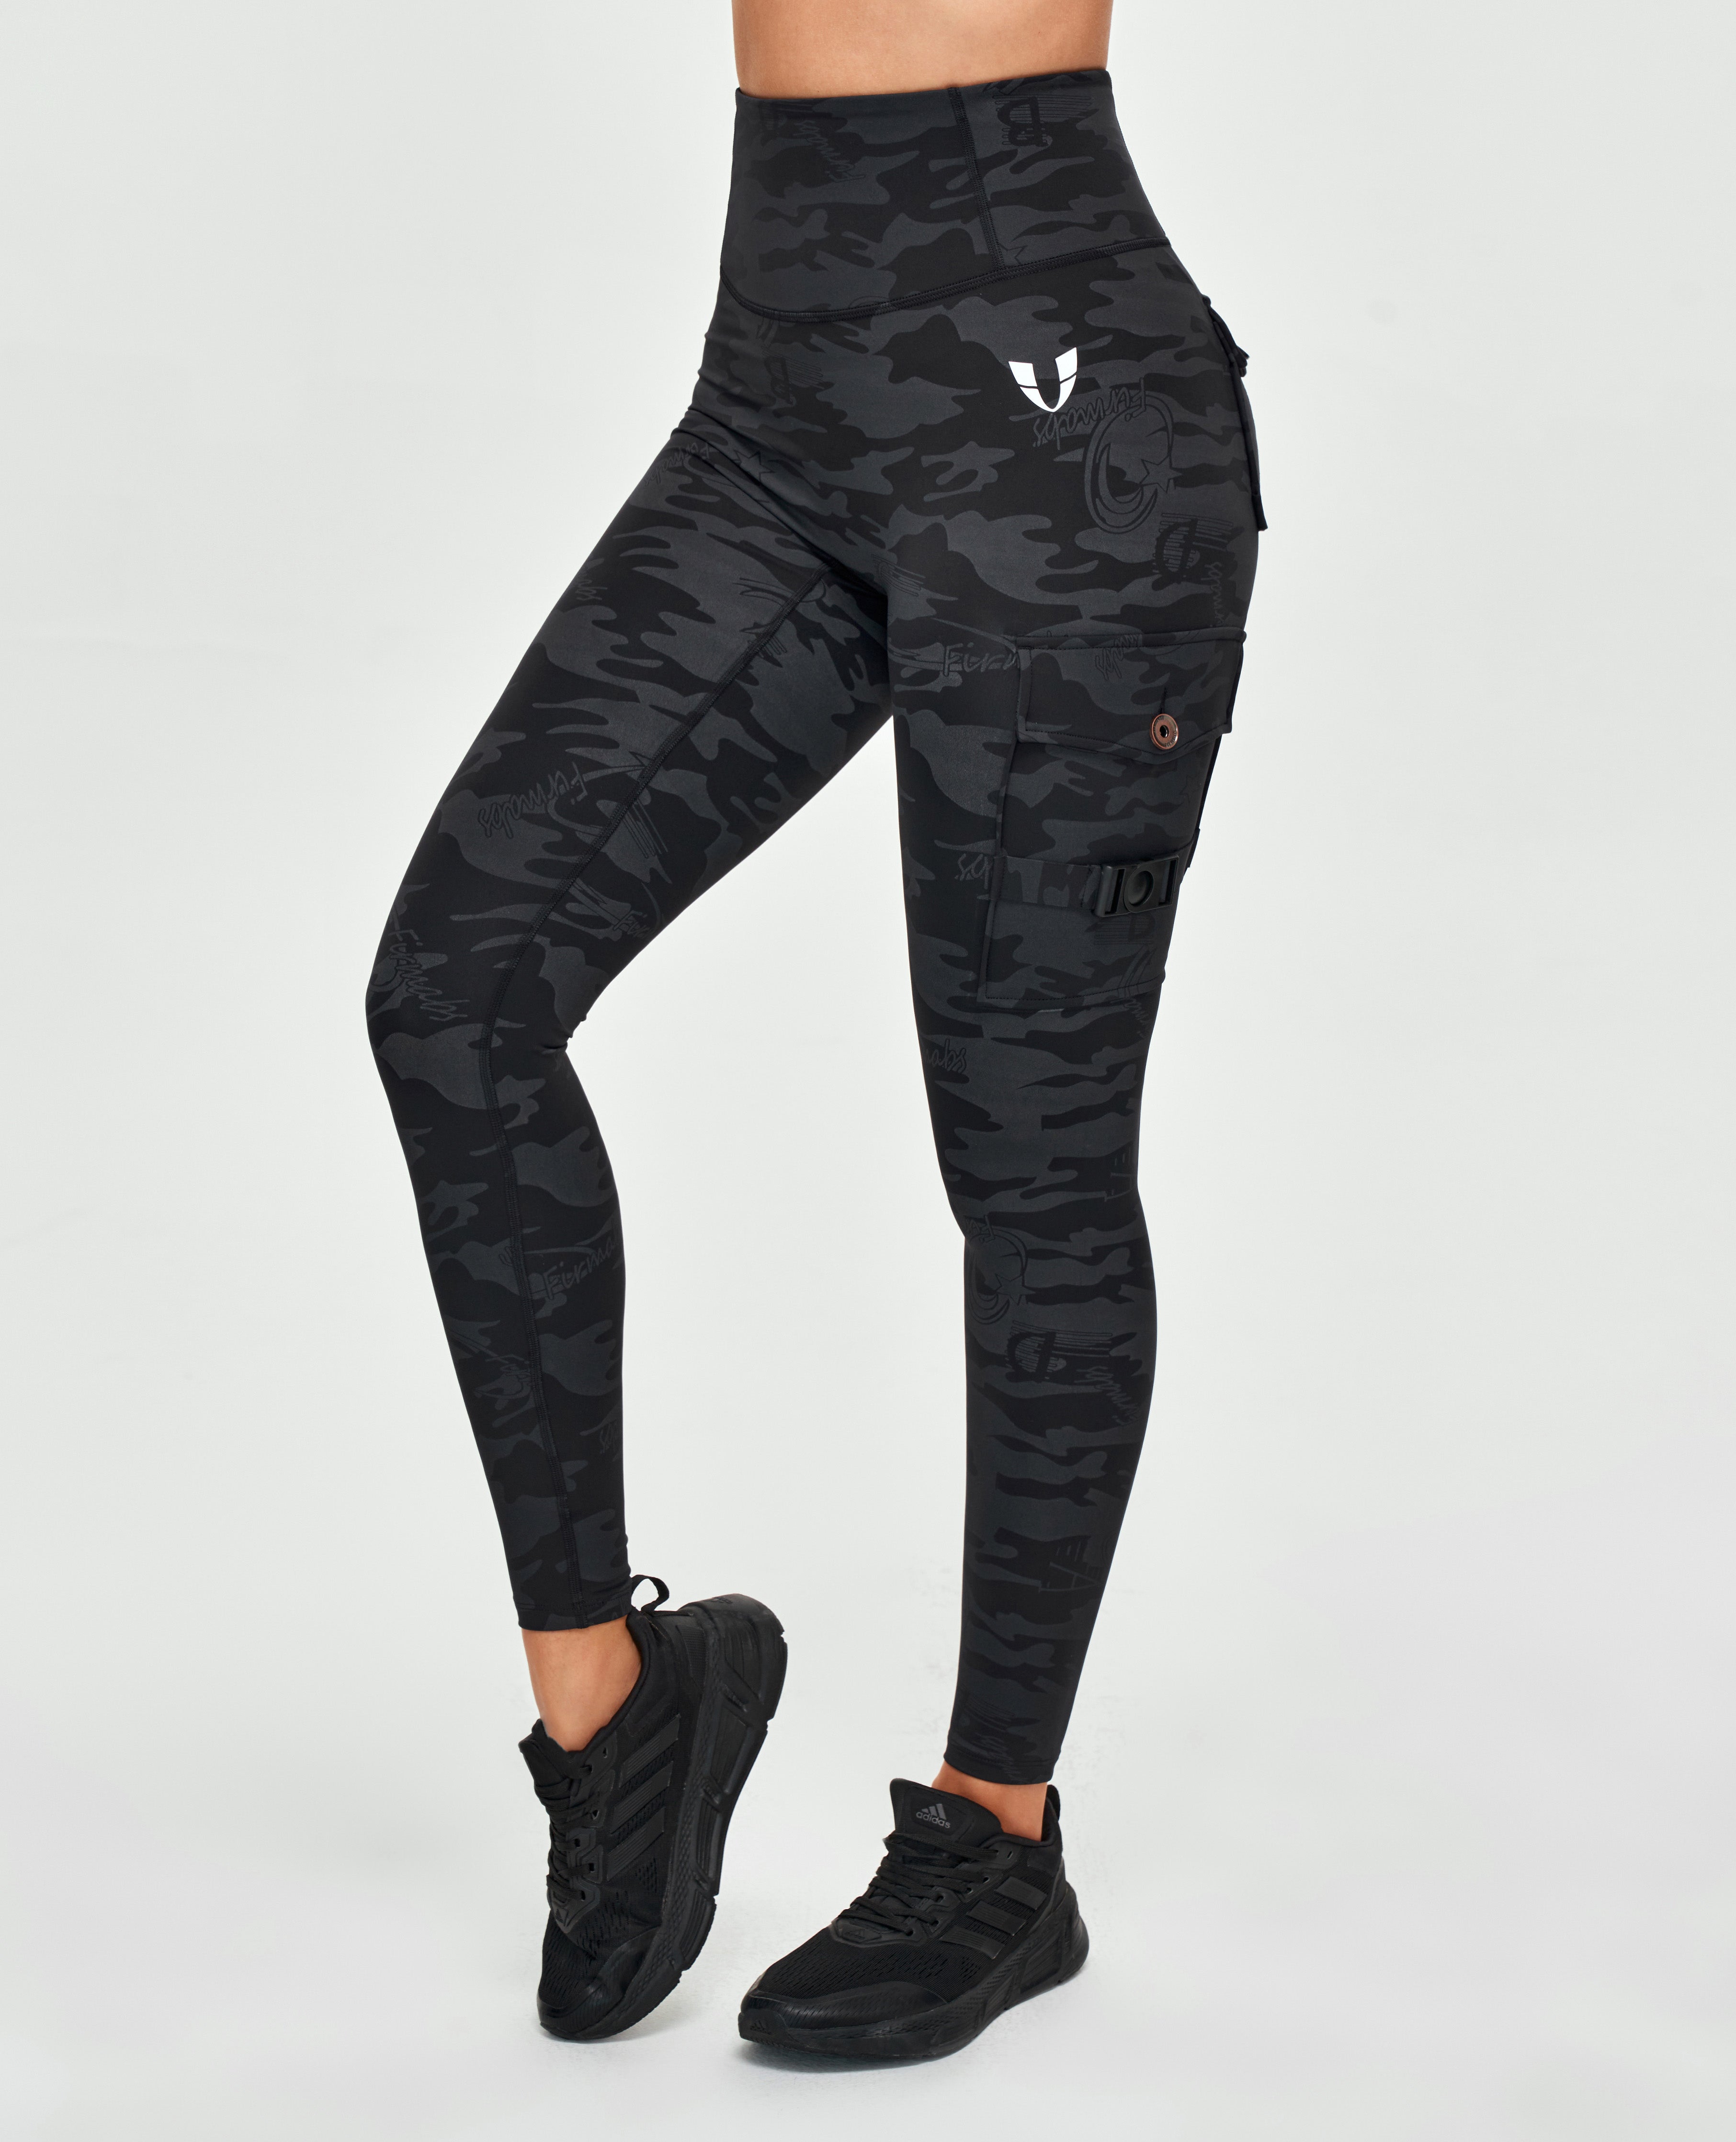 Promotional Body Support Trousers Women Breathable Leggings Yoga Suits -  China Promotional Body Support Trousers and Women Breathable Leggings Yoga  Suits price